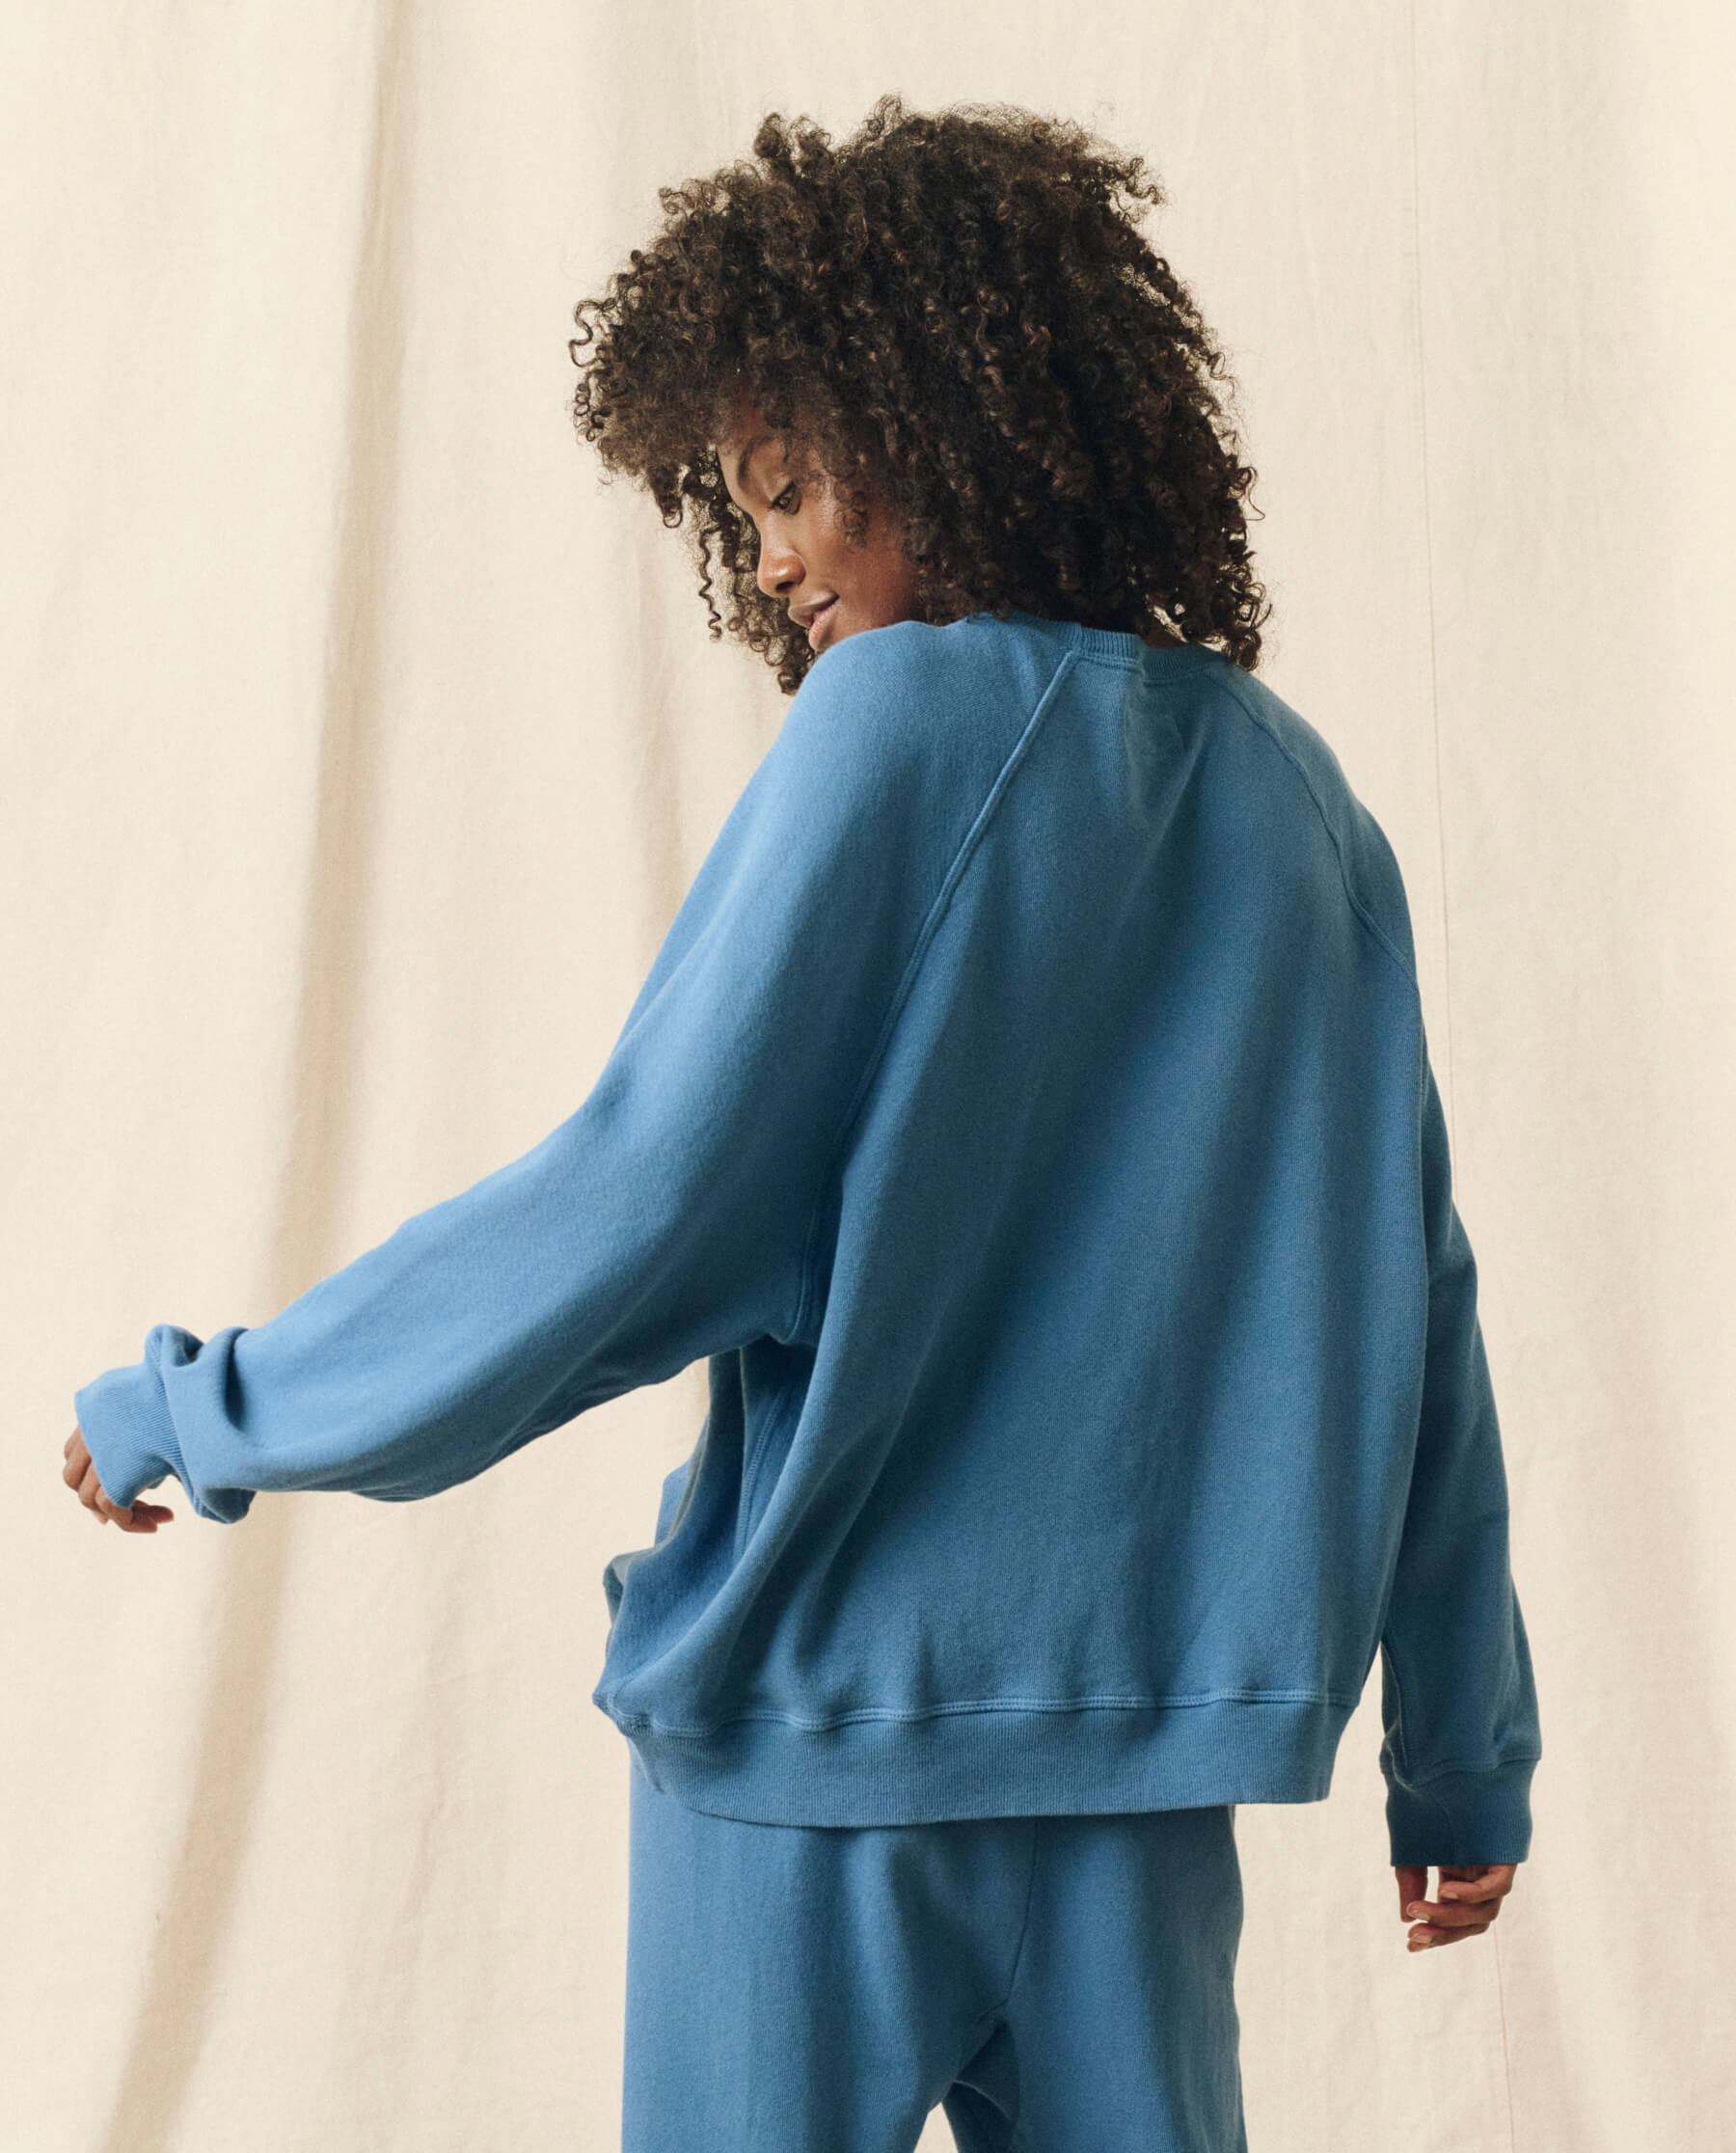 The Slouch Sweatshirt. Solid -- Glacier Blue SWEATSHIRTS THE GREAT. HOL 23 KNITS